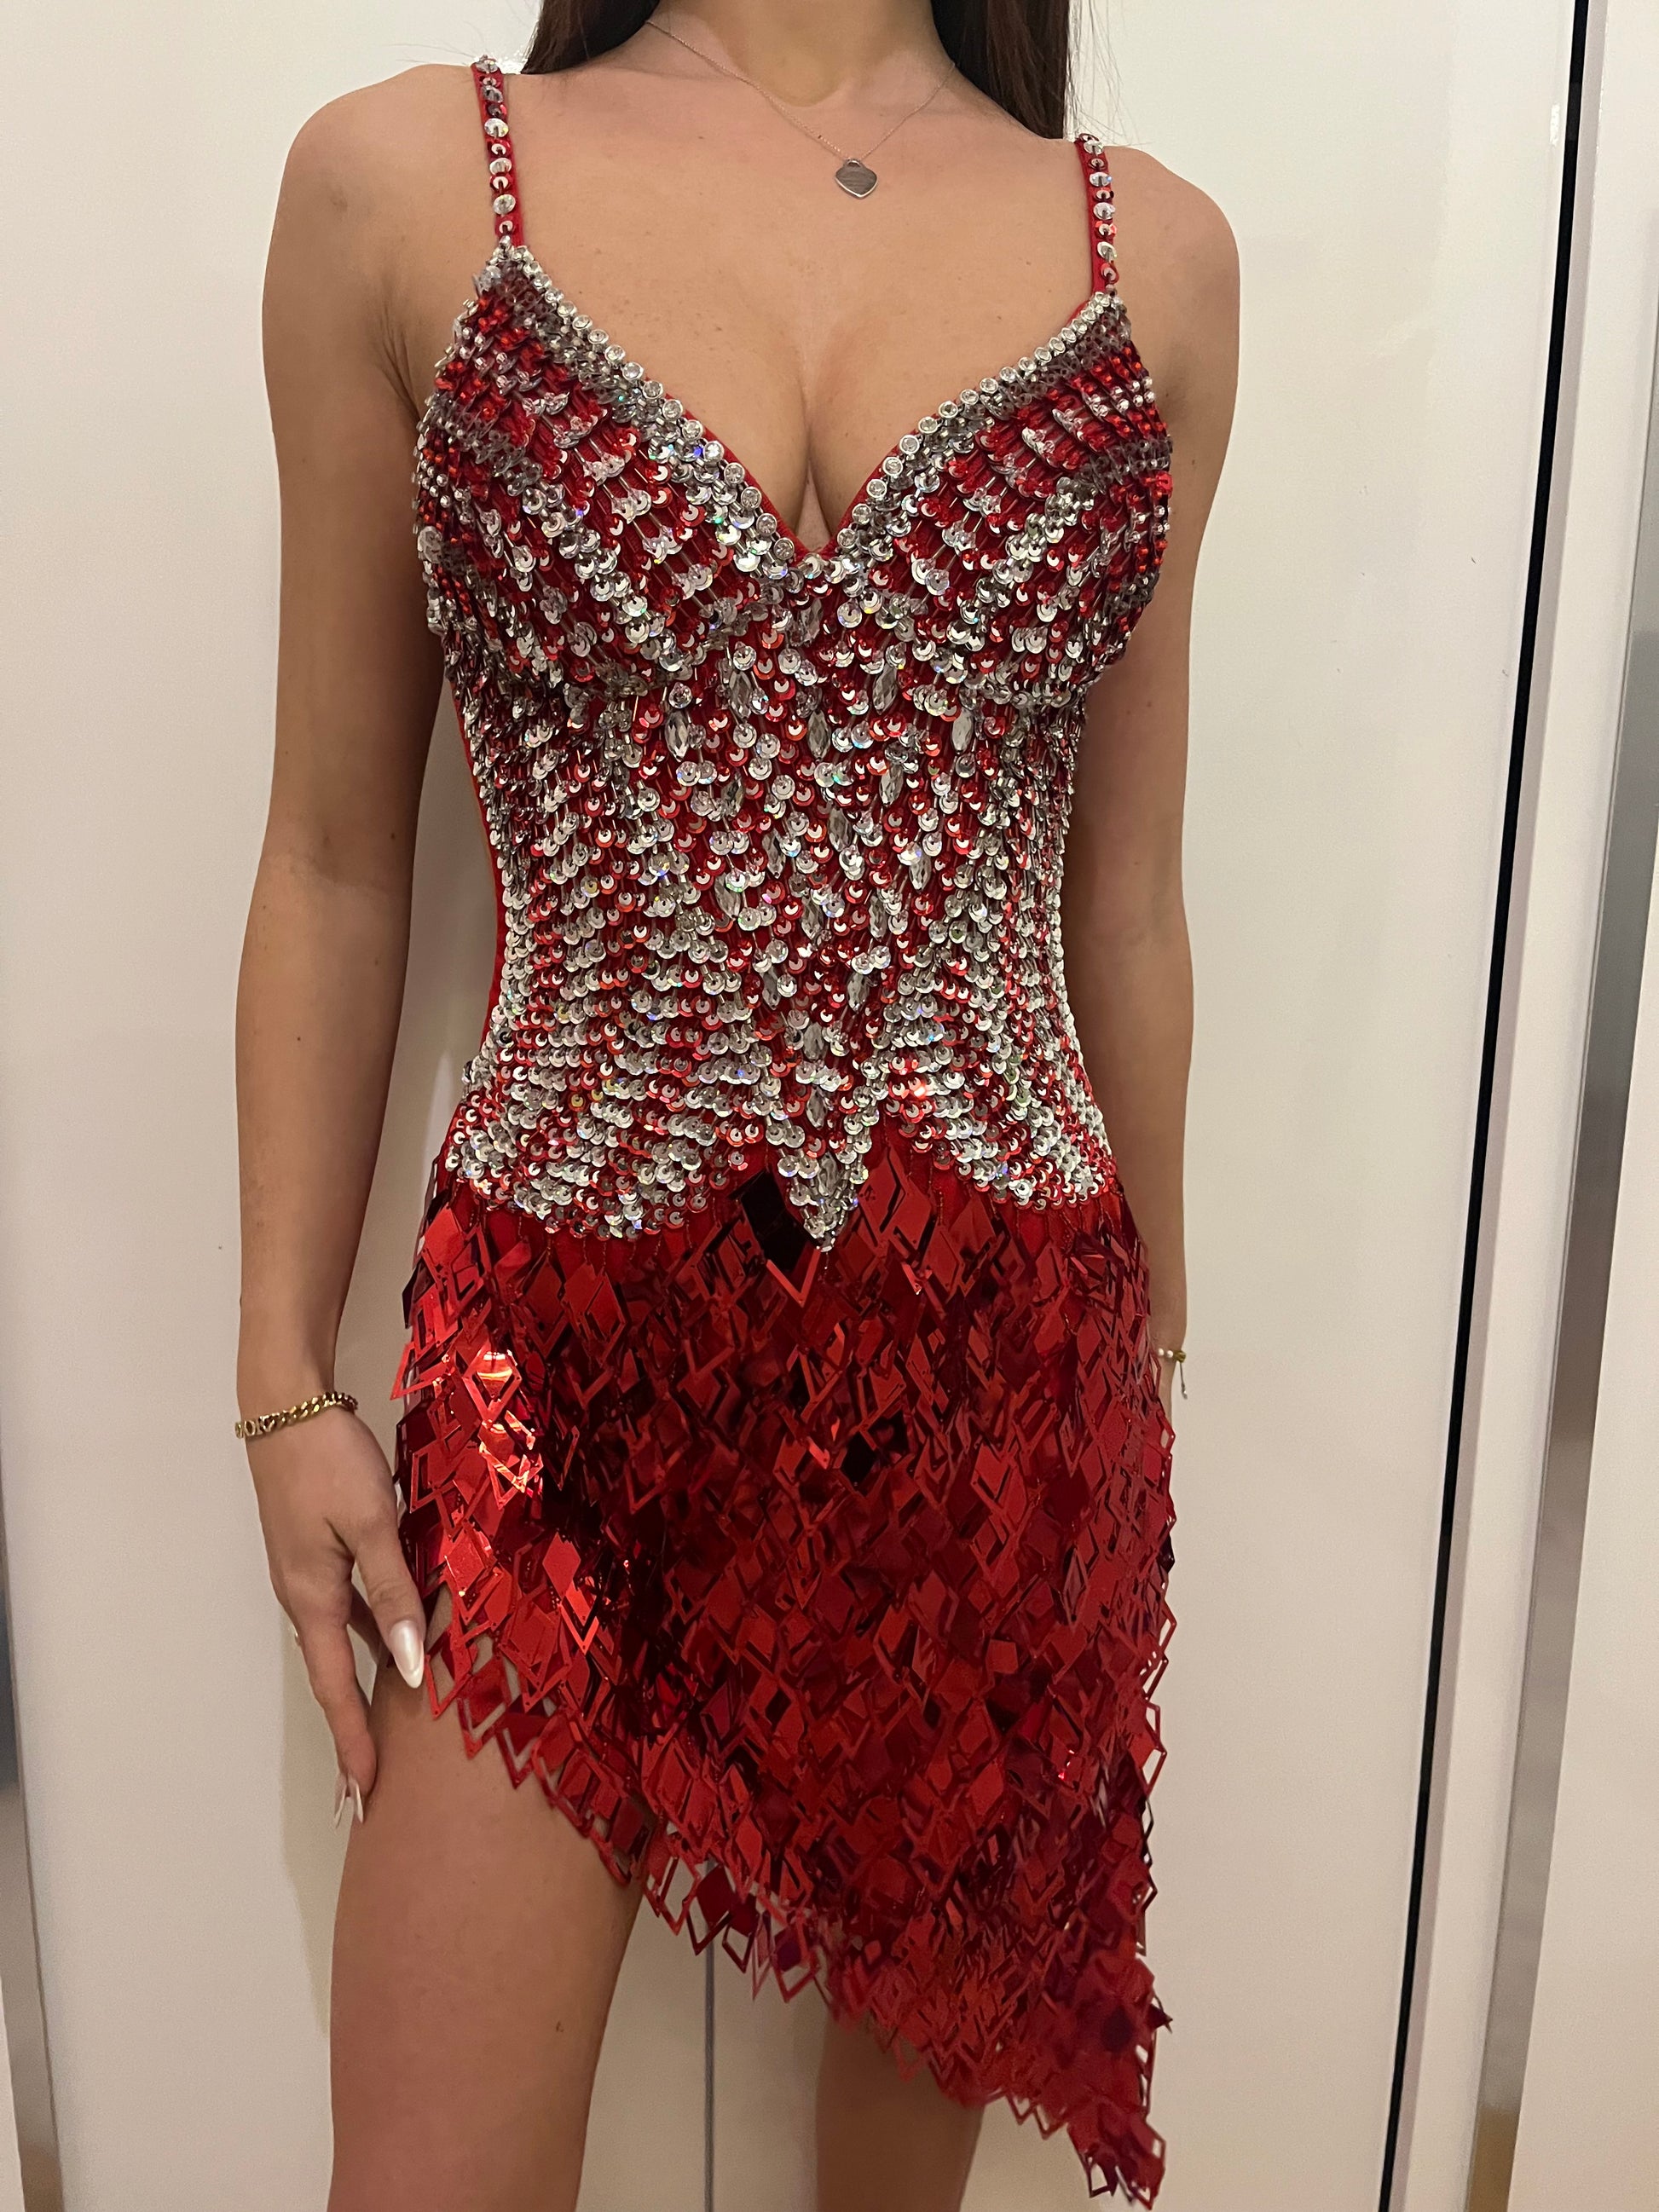 Radiant Red and Silver Sequined Latin Dance Dress, red latin dress, competition dress, rhythm dress, dance dresses for competition, sequin dress for sale